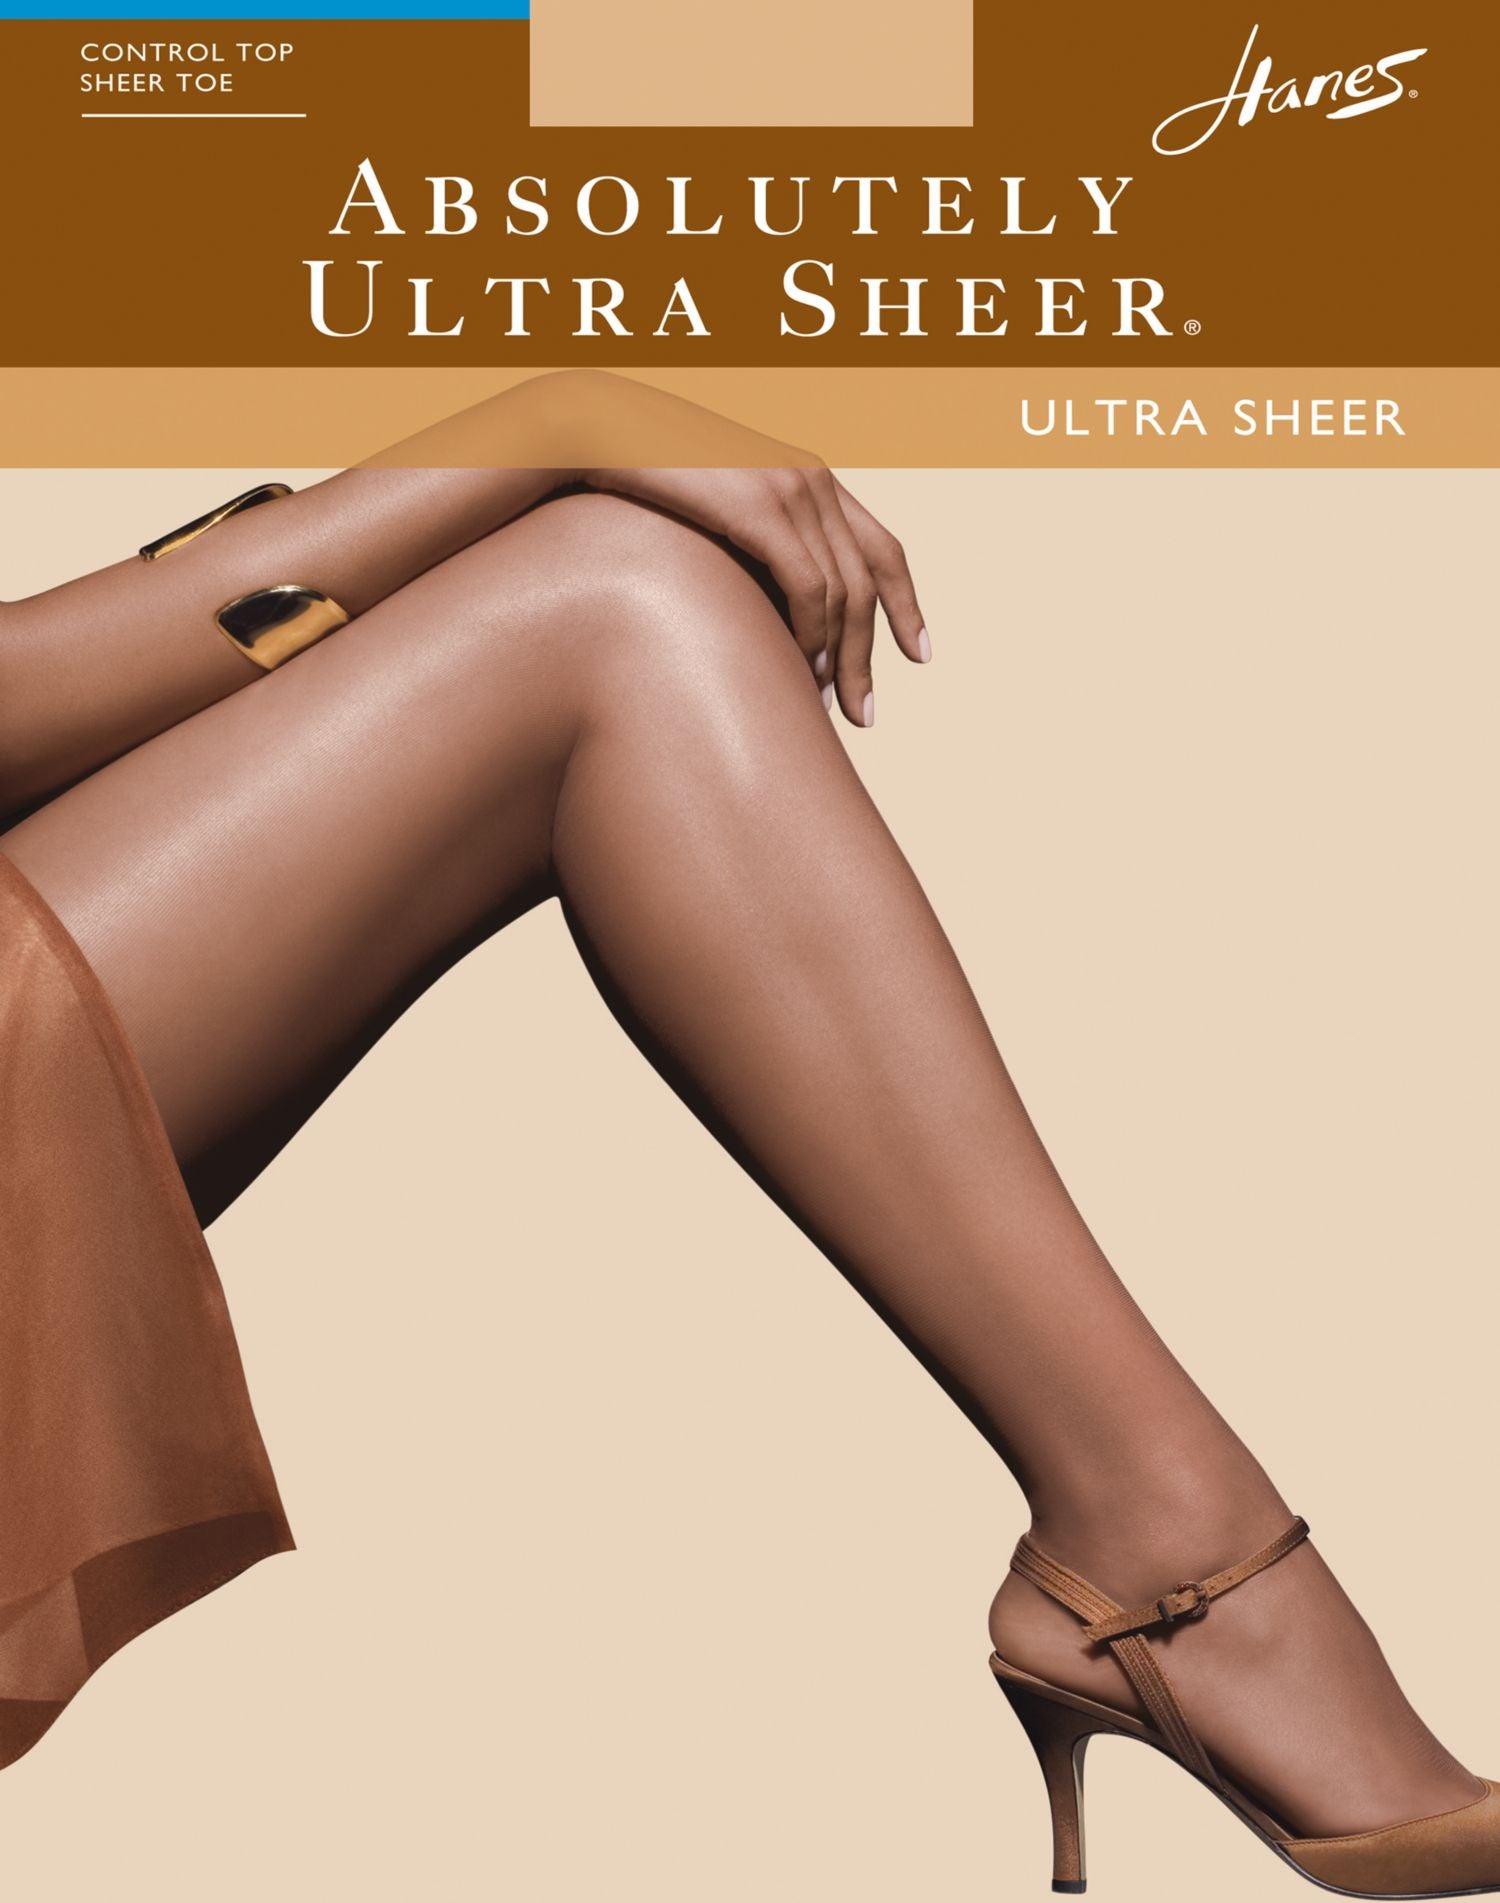 00706 - Hanes Absolutely Ultra Sheer Control Top Reinforced Toe Pantyhose 1  Pair